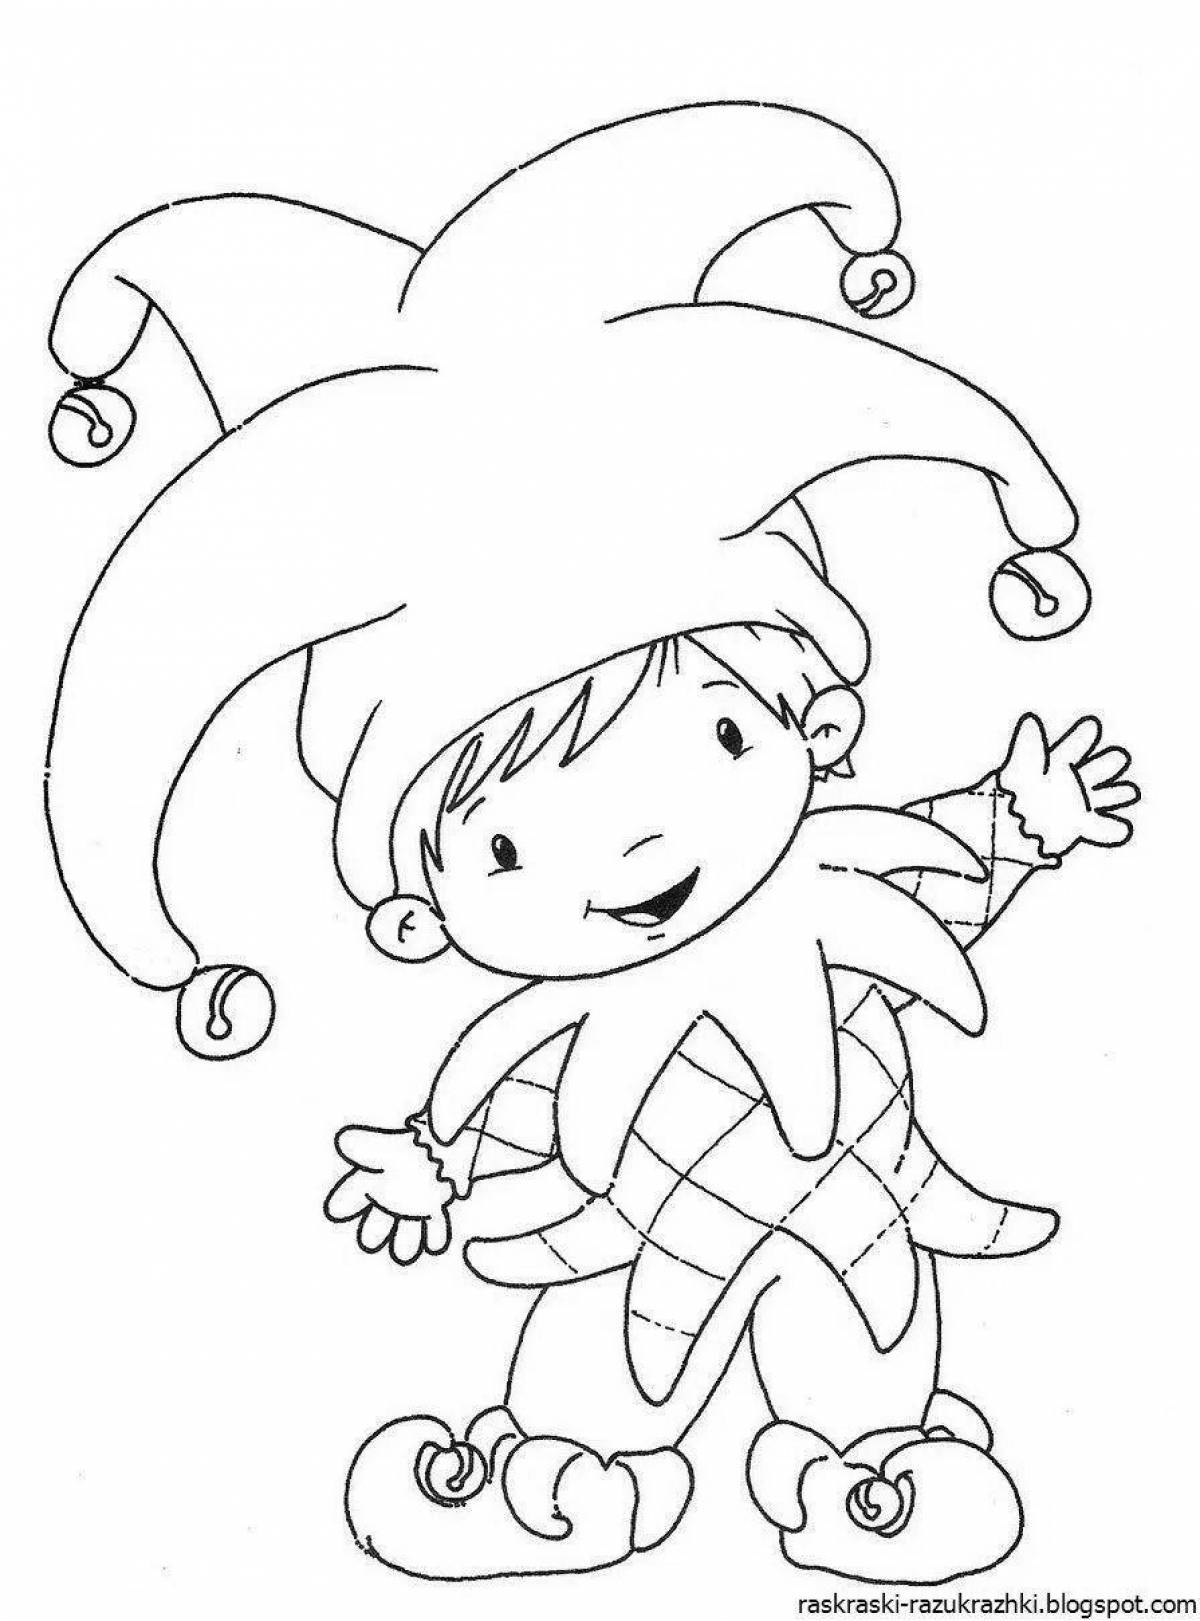 Witty parsley character coloring page